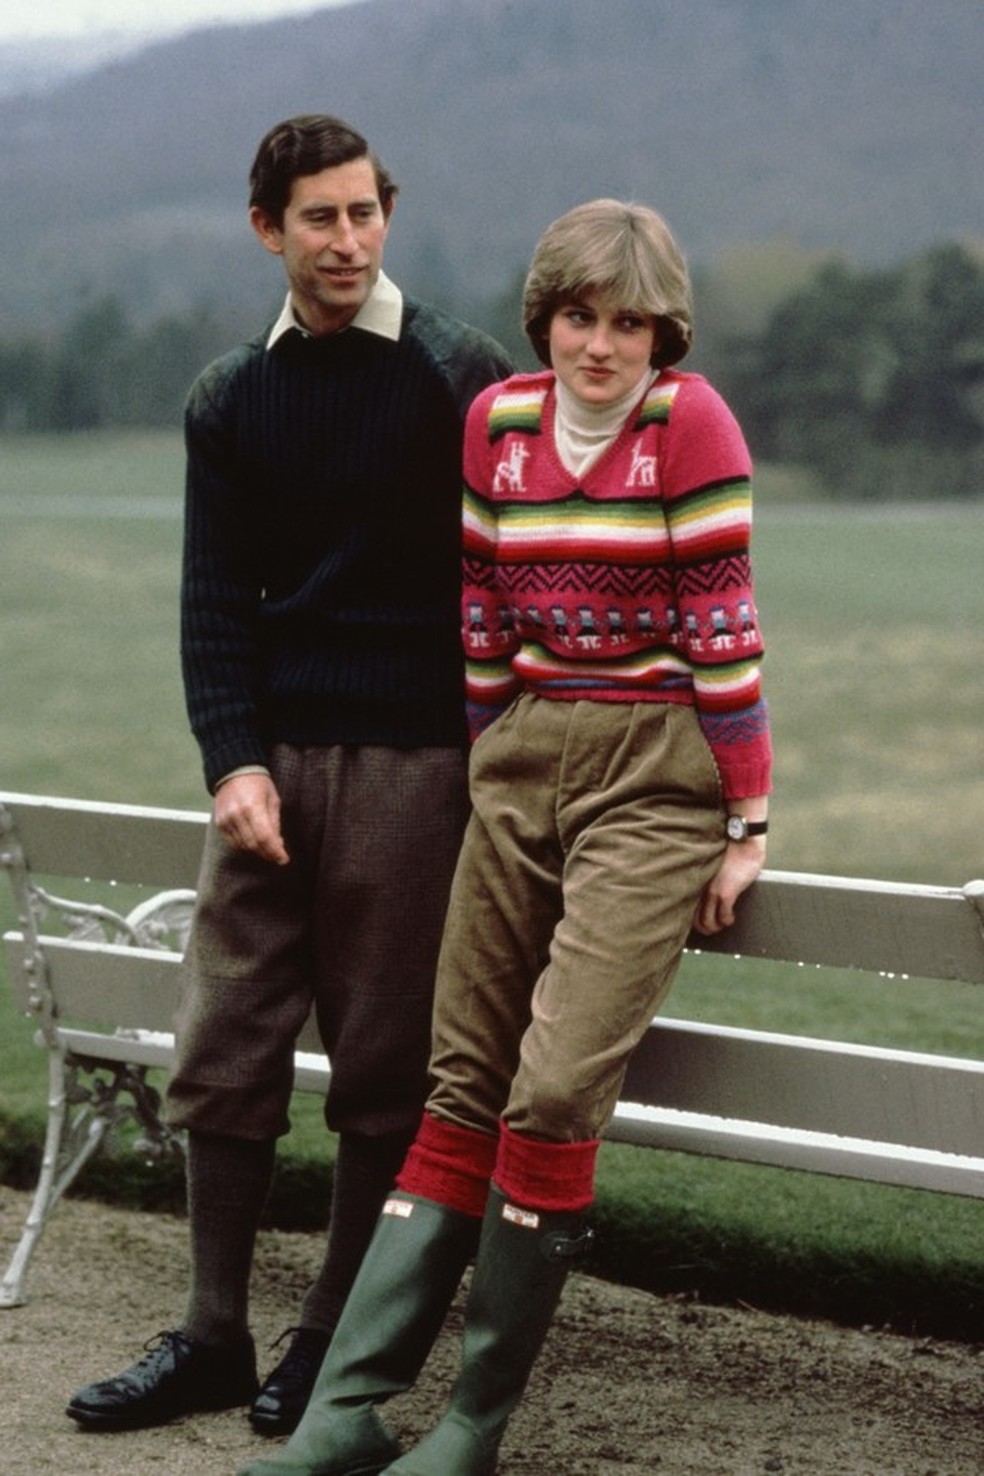 Princípe Charles e Lady Diana Spencer (Getty Images) — Foto: Glamour